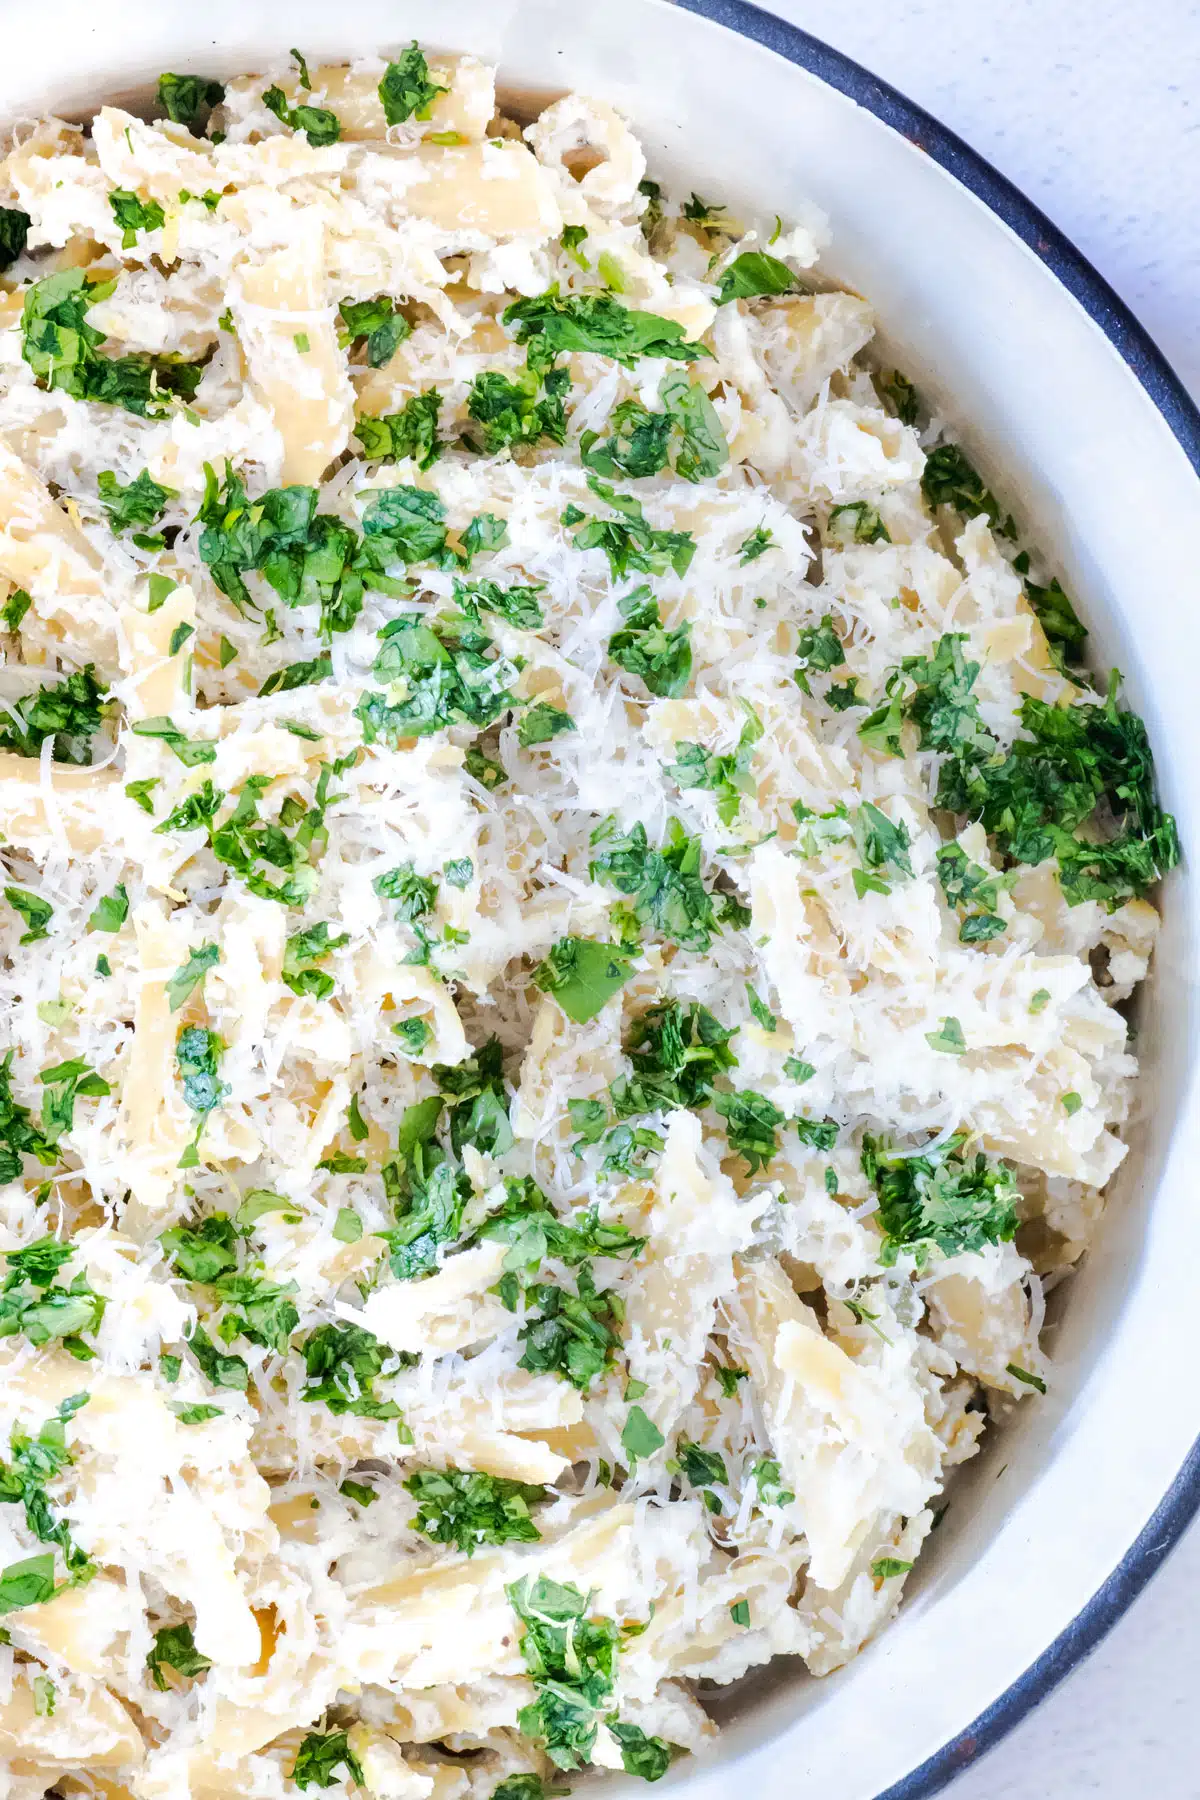 Looking inside a pot to see lemon ricotta pasta that has been sprinkled with parmesan cheese and gremolata.